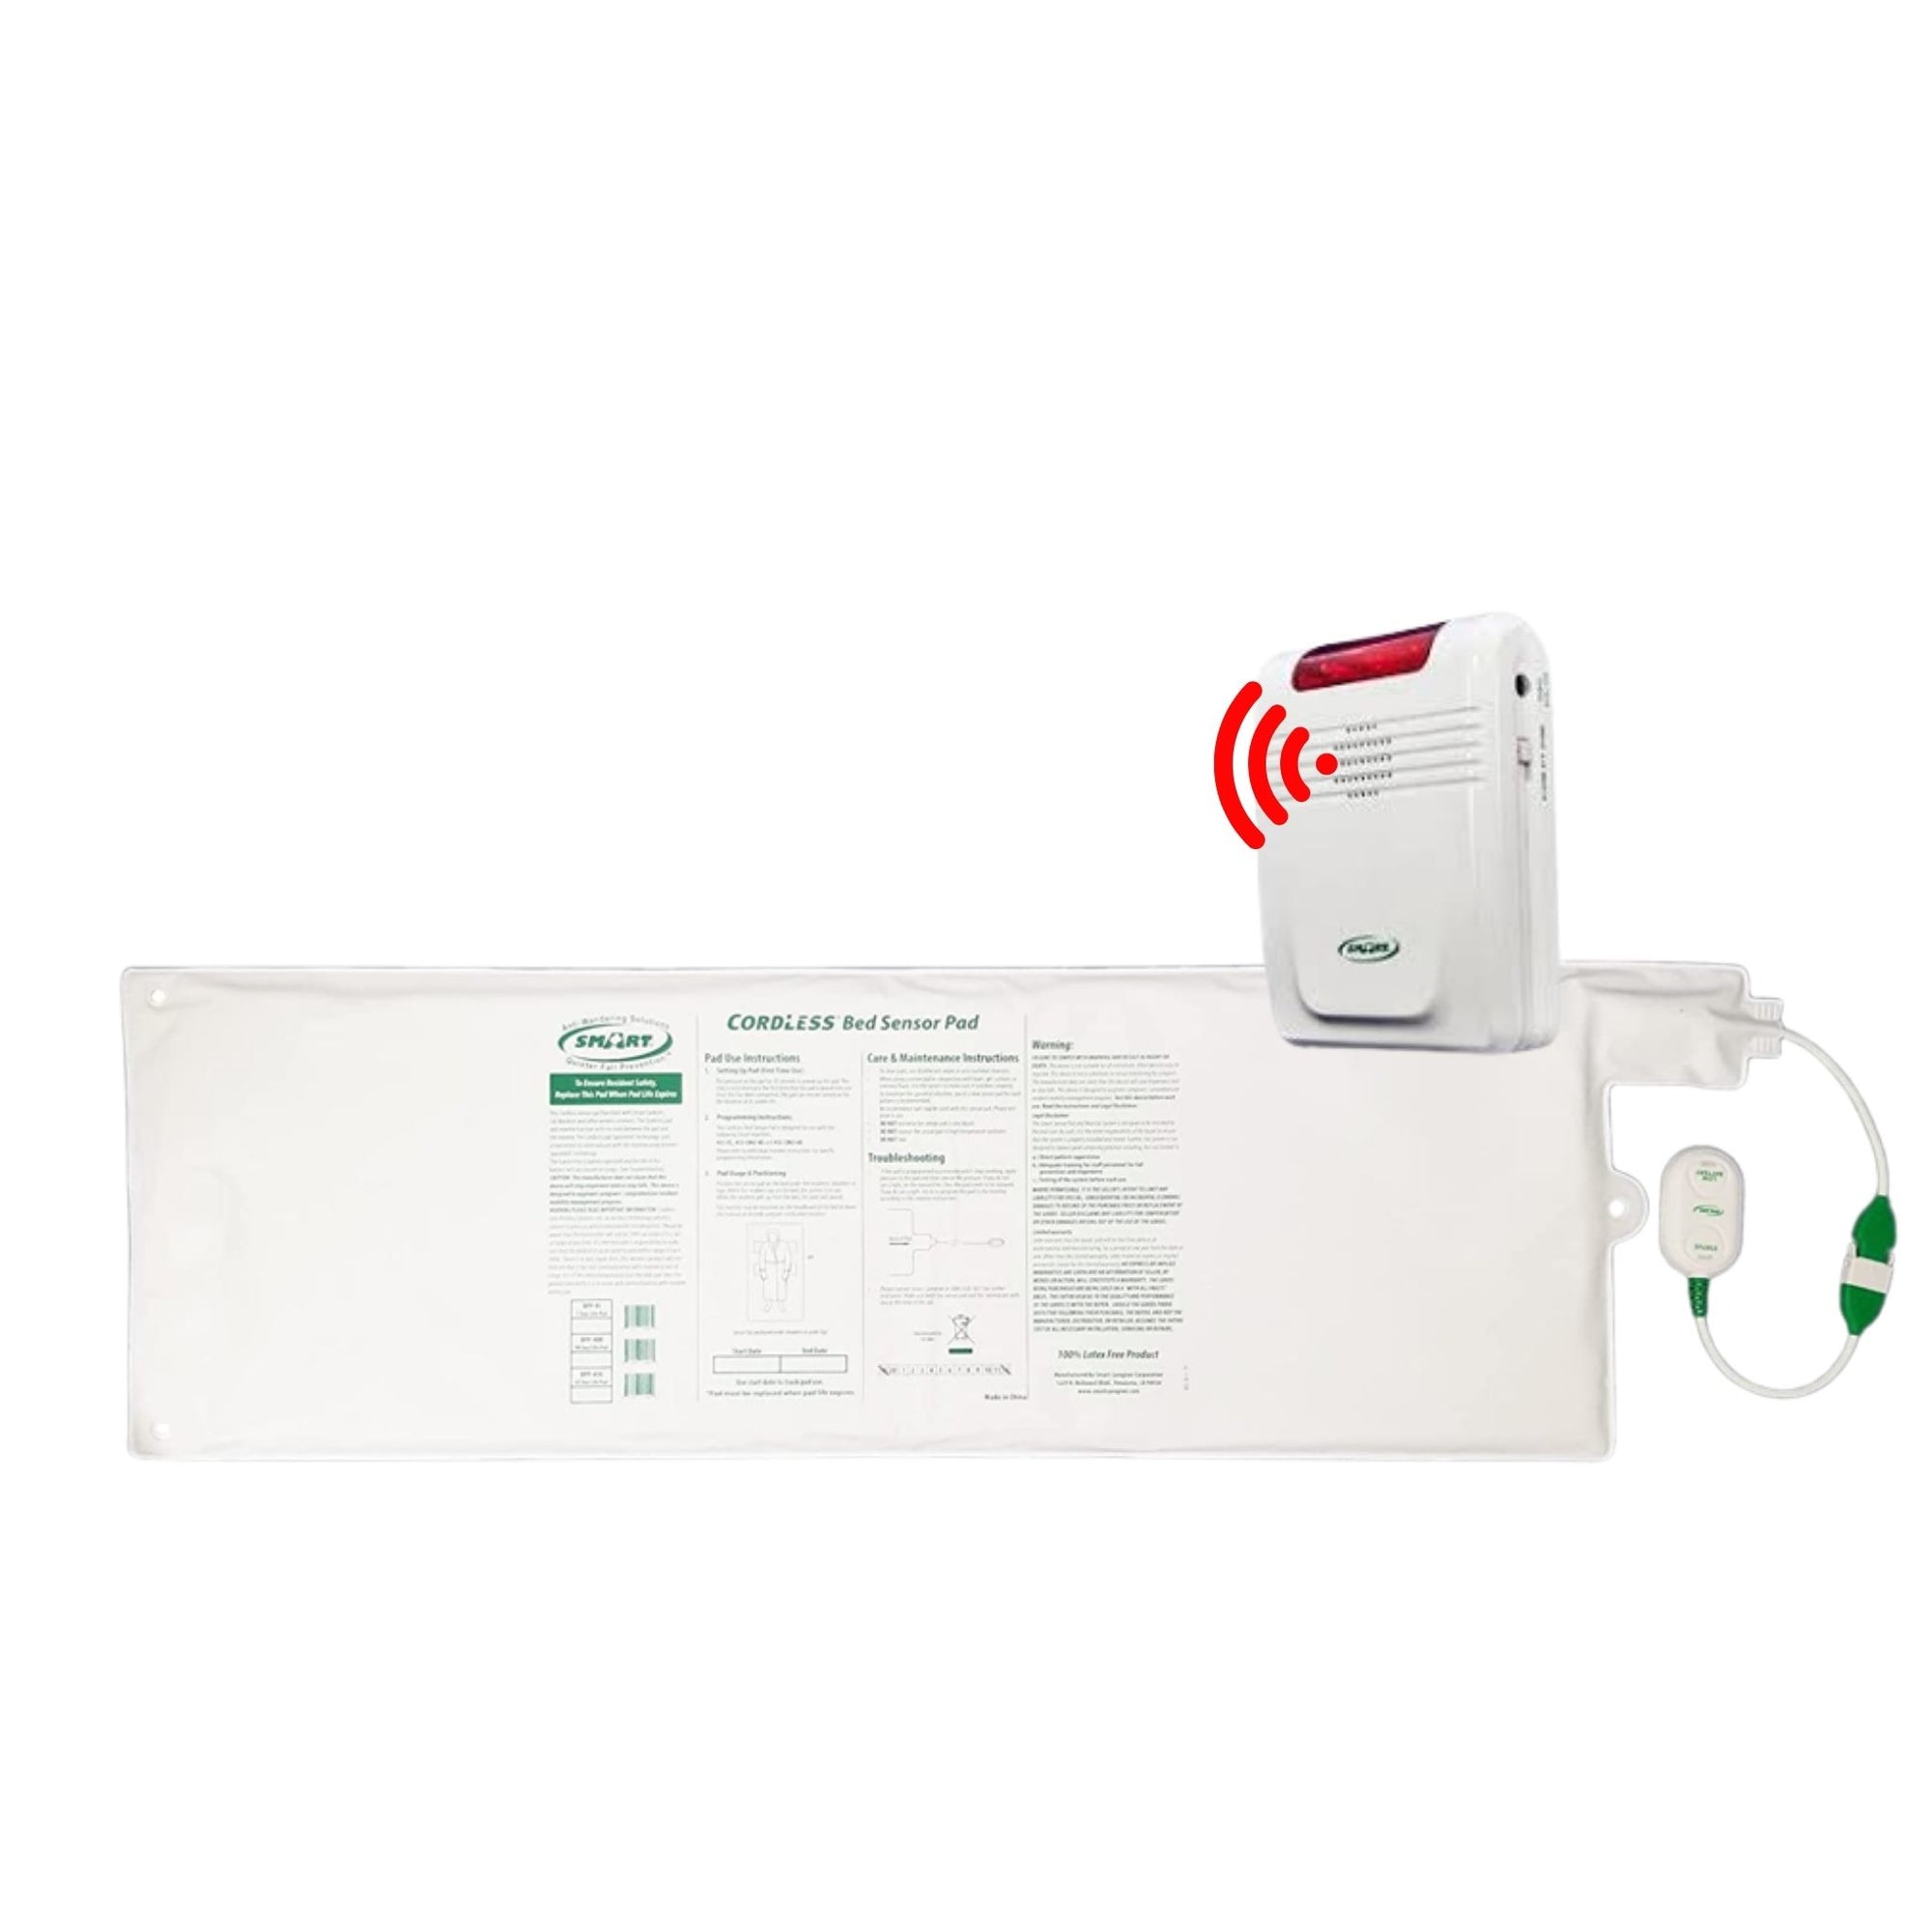 Wireless Bed Exit Alarm - Bed Sensor Pad & Transmitter (Package)